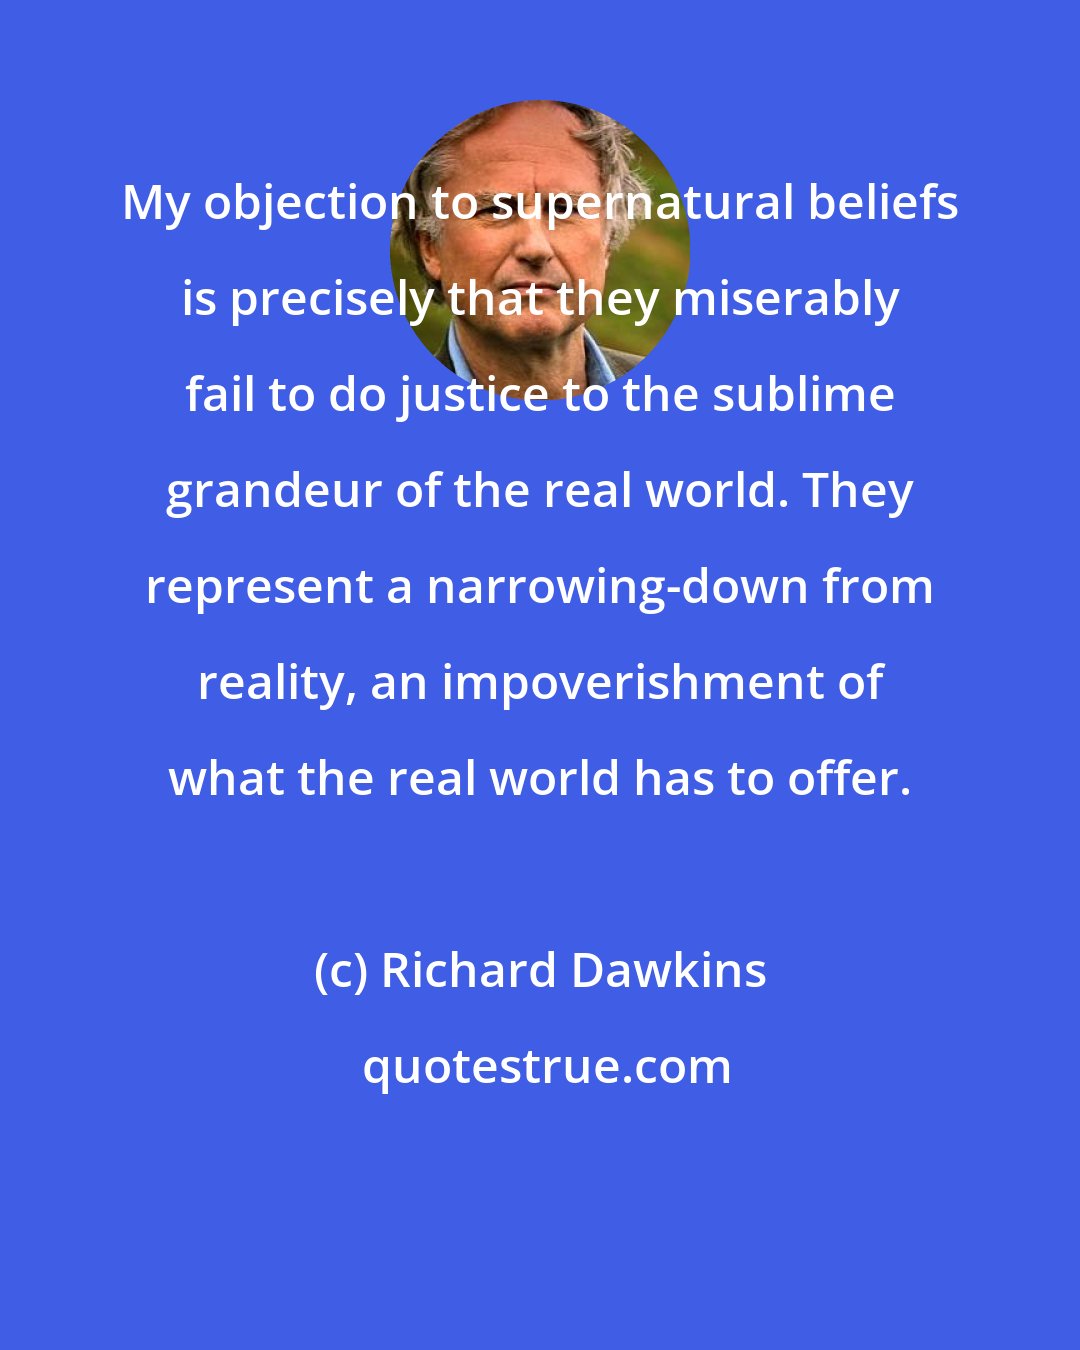 Richard Dawkins: My objection to supernatural beliefs is precisely that they miserably fail to do justice to the sublime grandeur of the real world. They represent a narrowing-down from reality, an impoverishment of what the real world has to offer.